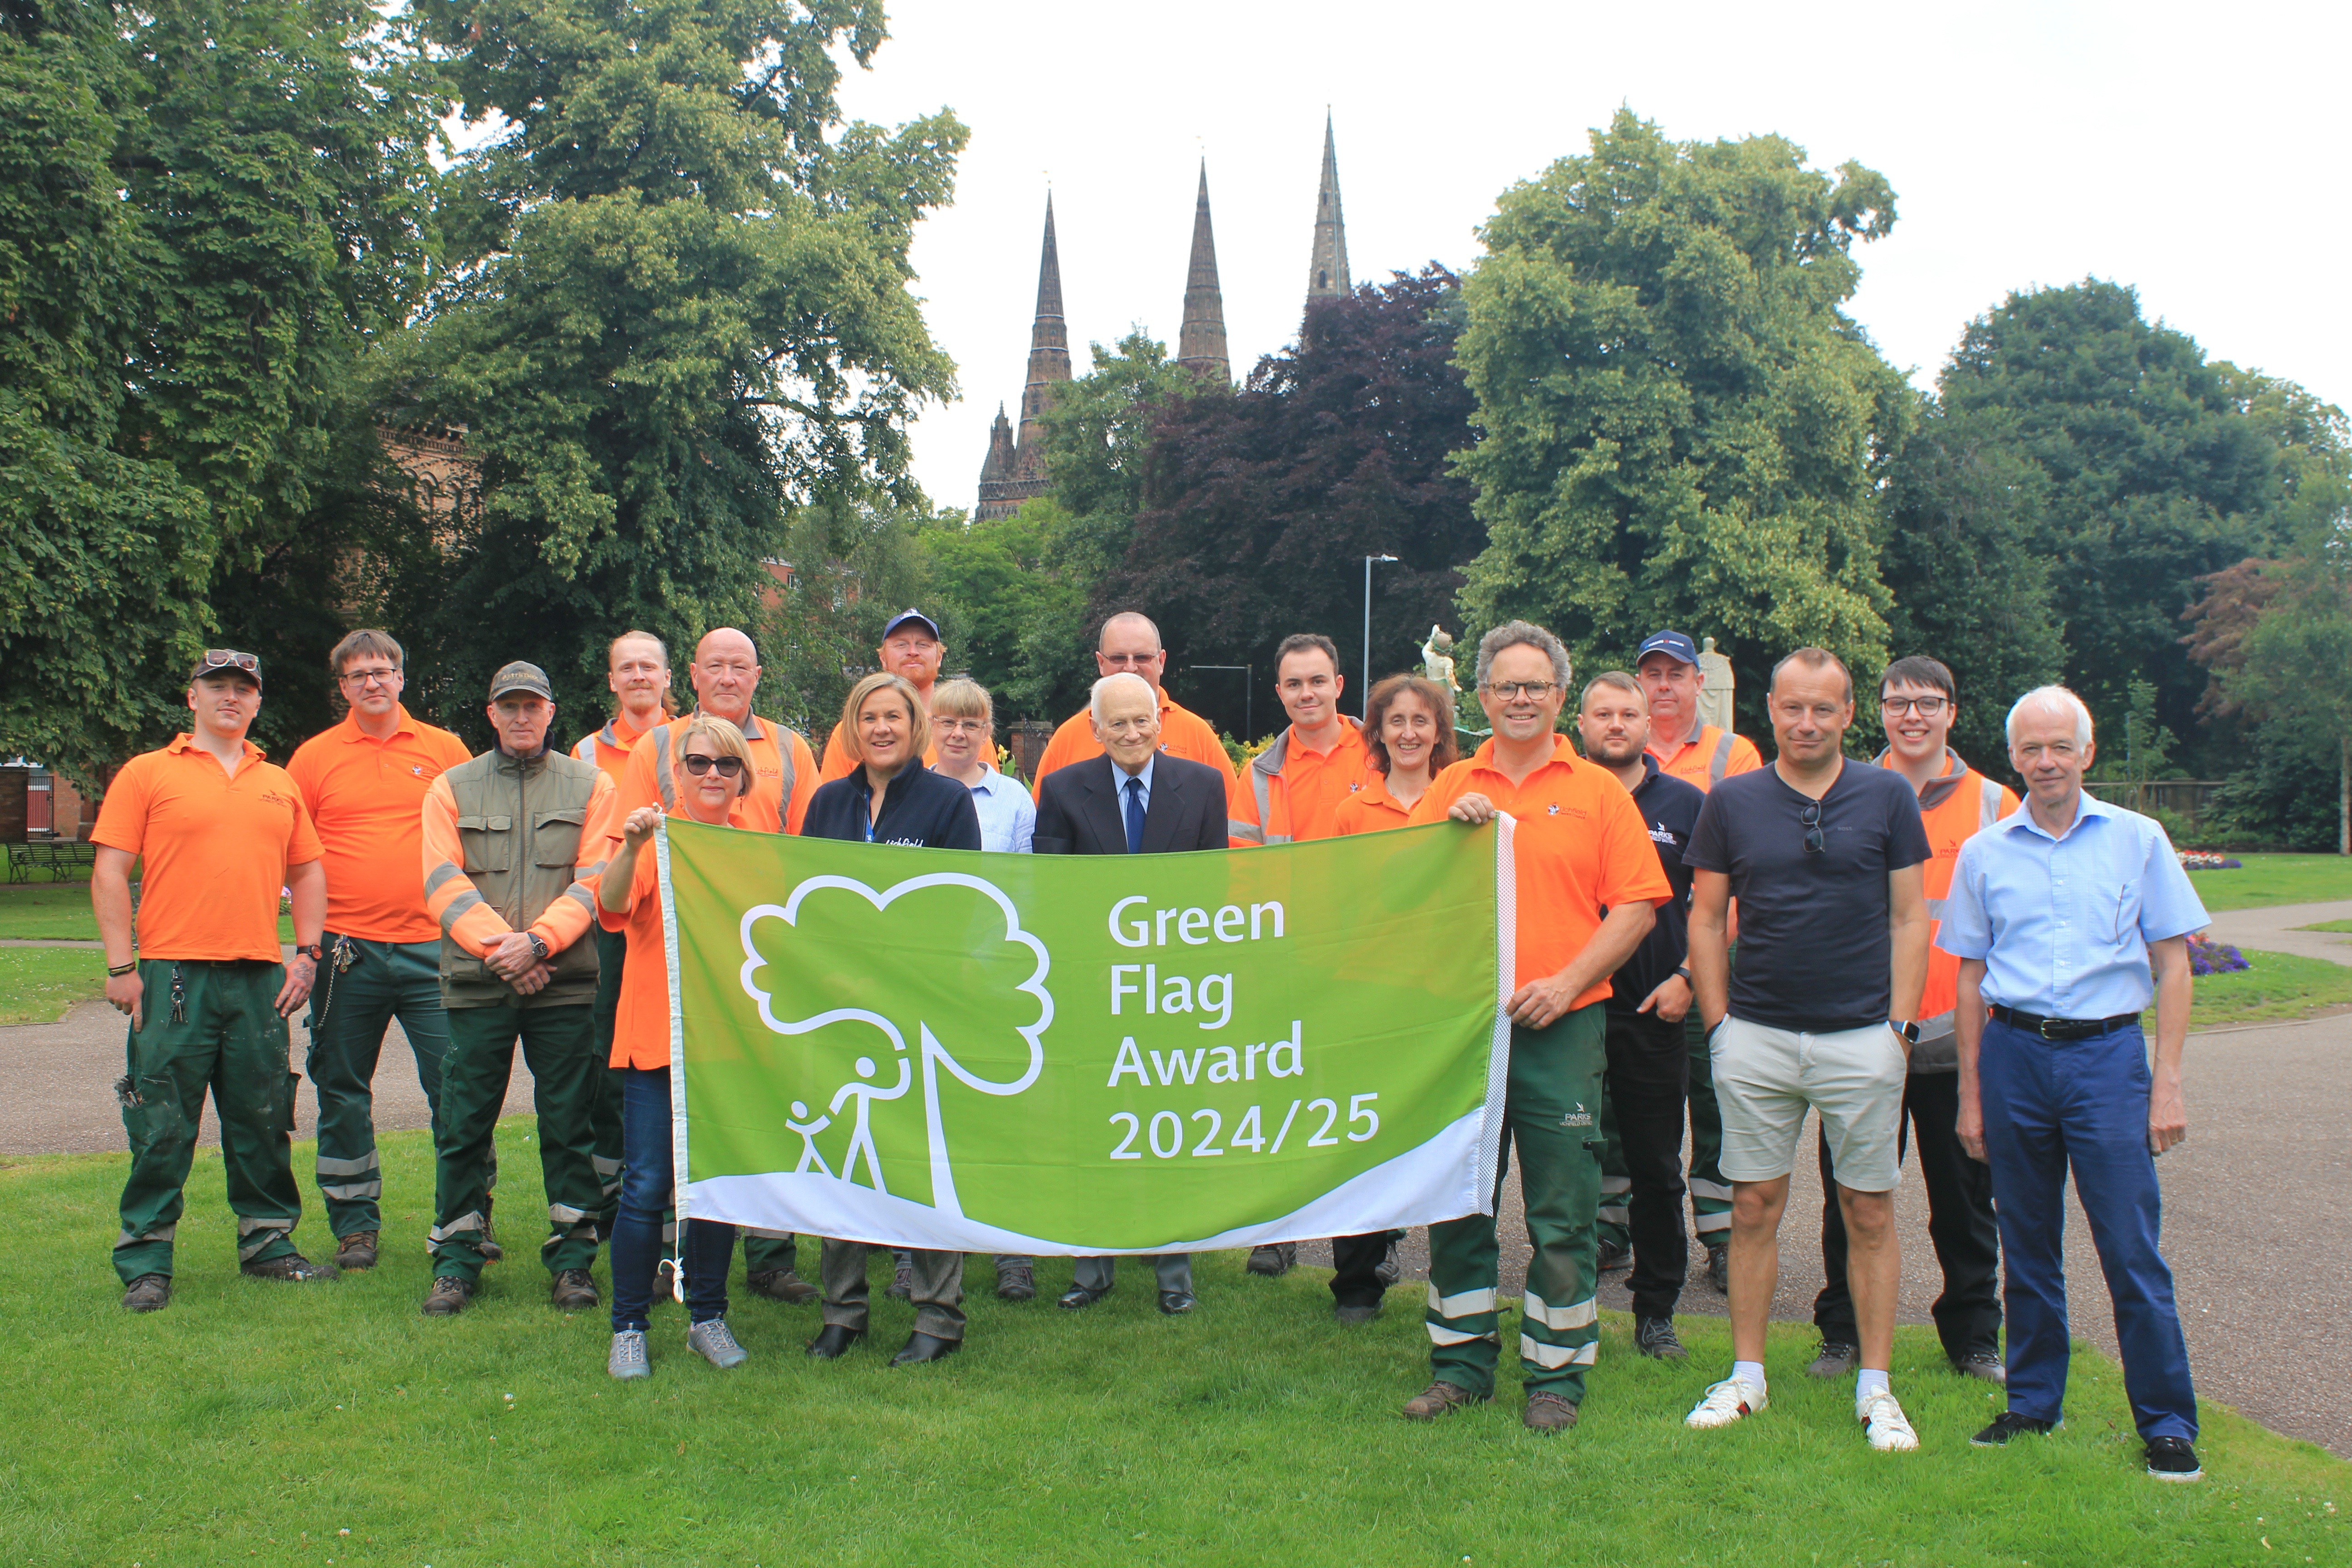 A picture of Lichfield District Council staff, partner representatives and Deputy Leader and Cabinet Member for Leisure and Major Projects Councillor Andy Smith celebrating the Green Flag Award.